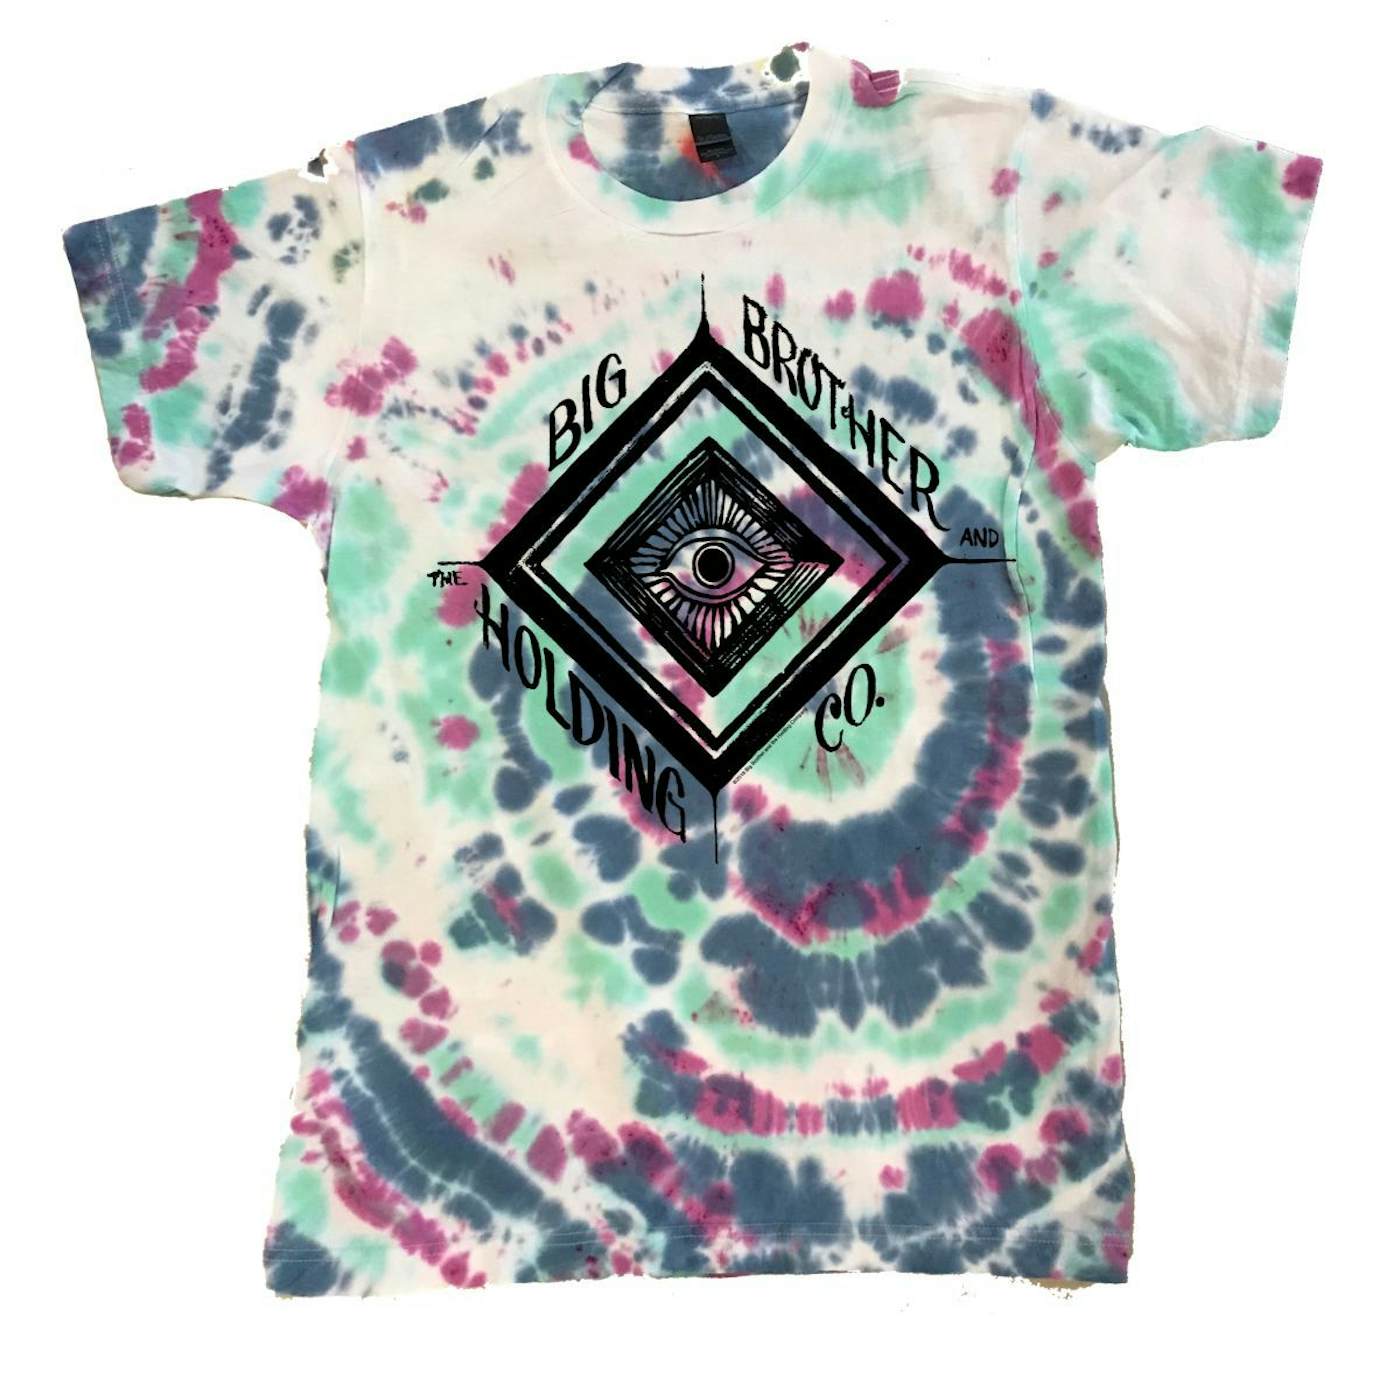 Big Brother & The Holding Company Tie-Dye Eye T-Shirt